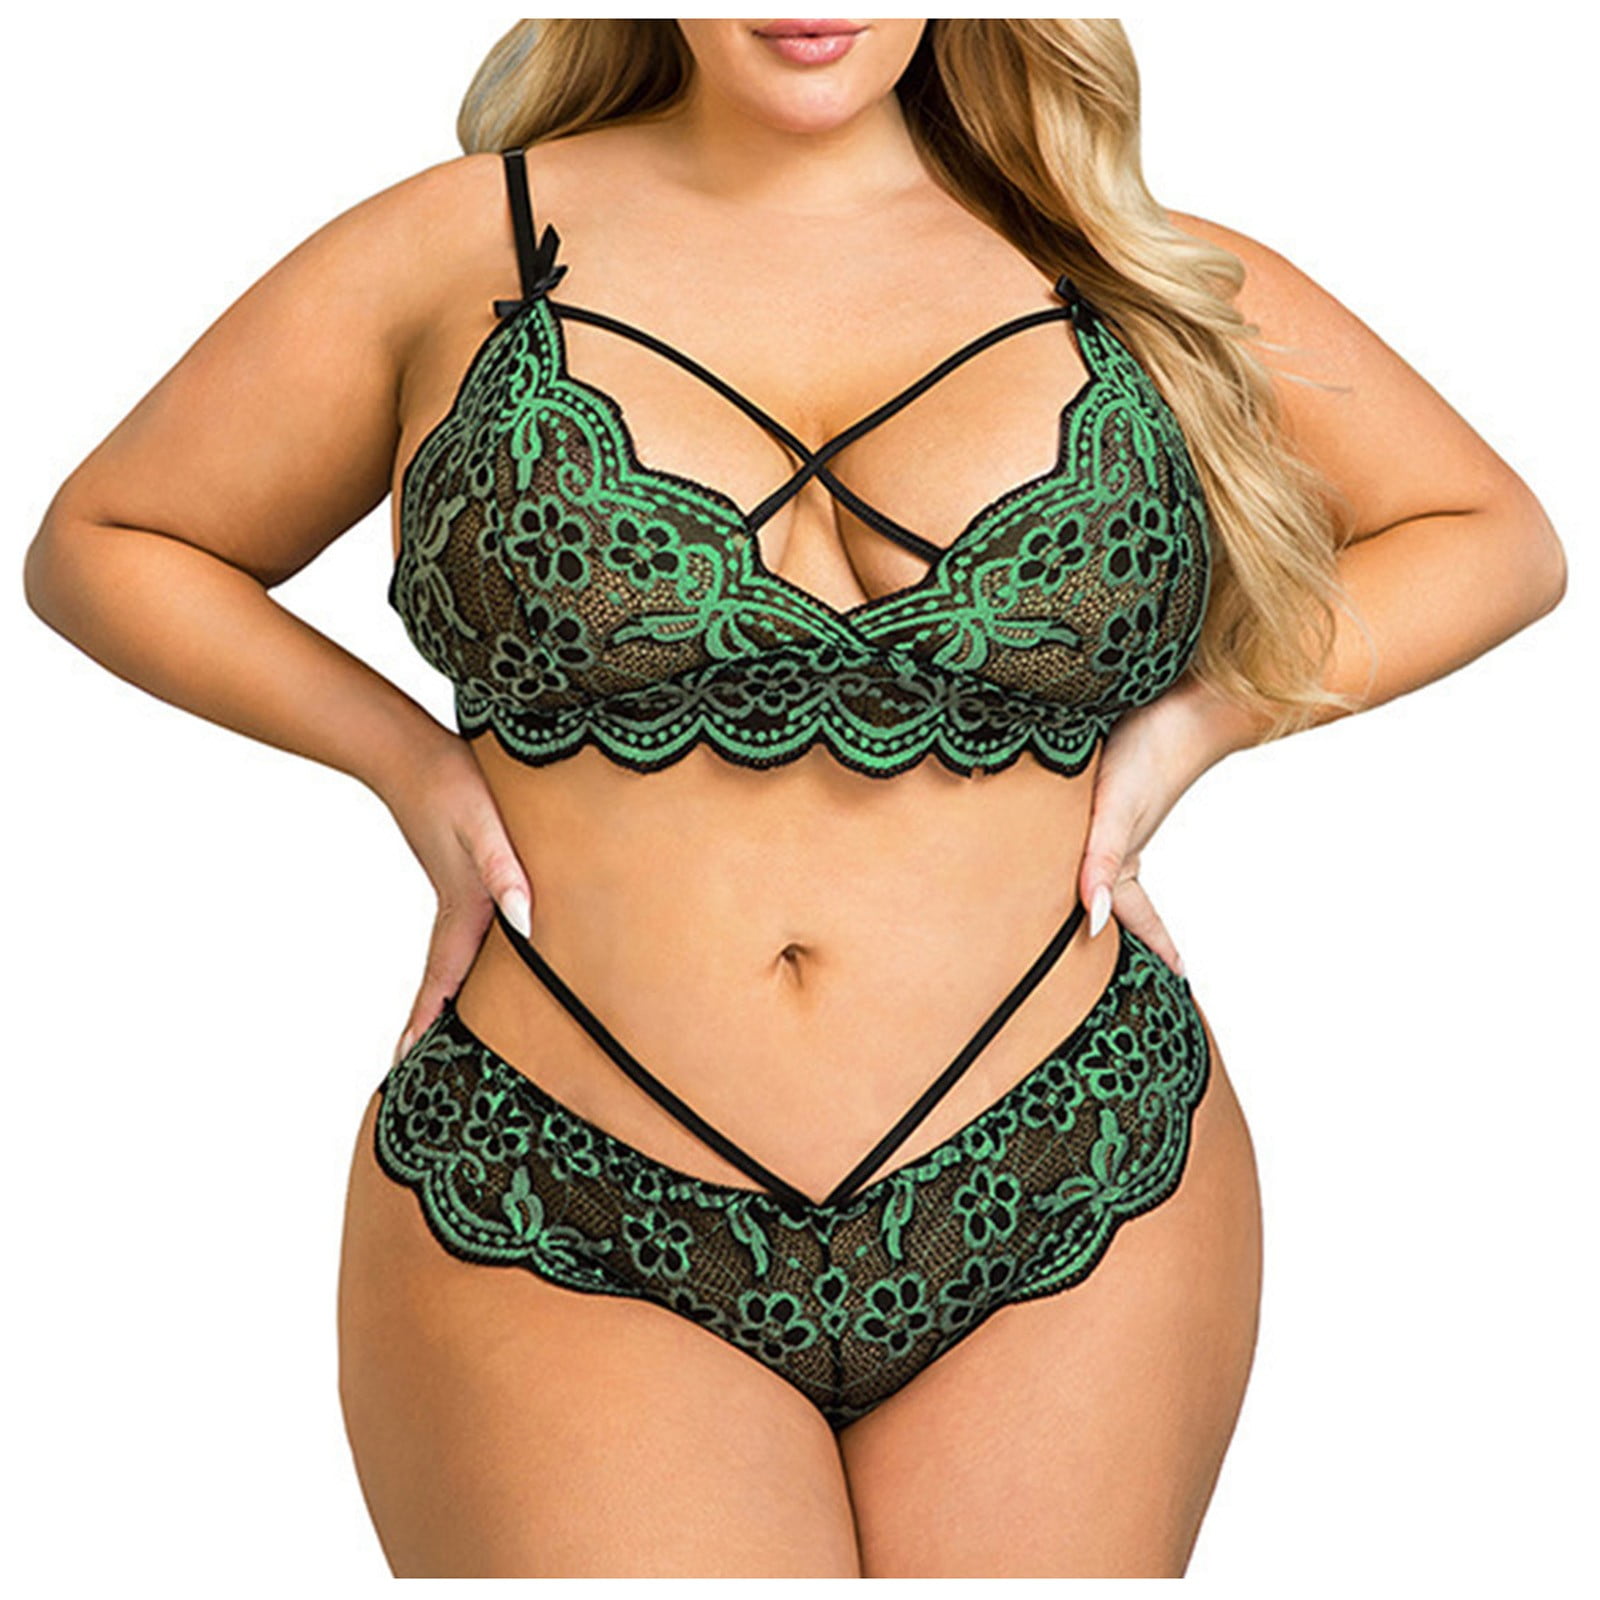  ANMUR Plus Size Bra and Panty Sets for Women Underwire White  Ultra Thin Sexy See Through Bras Lingerie Set (Color : Green, Size : 80/36C)  : Clothing, Shoes & Jewelry